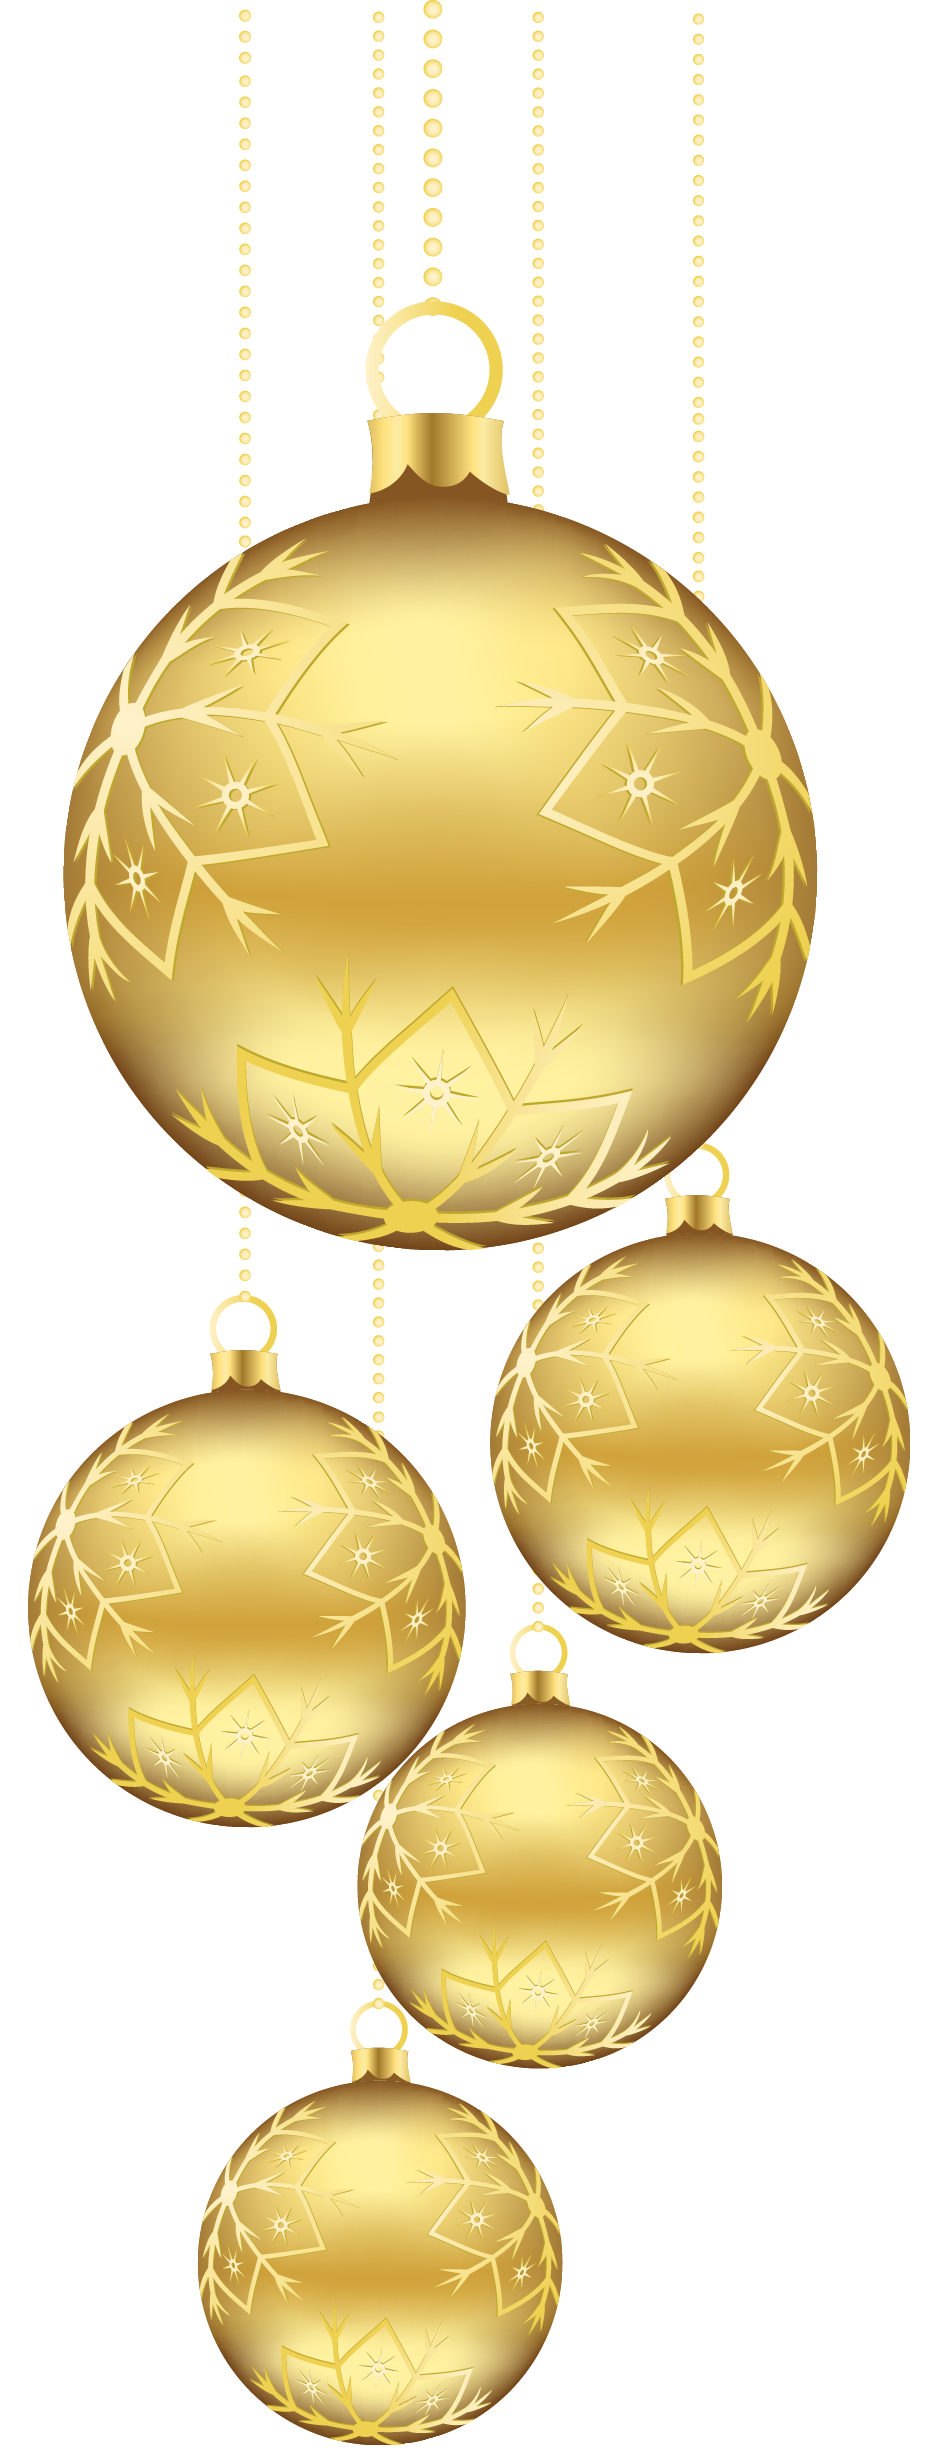 Gold Christmas Bauble PNG Image